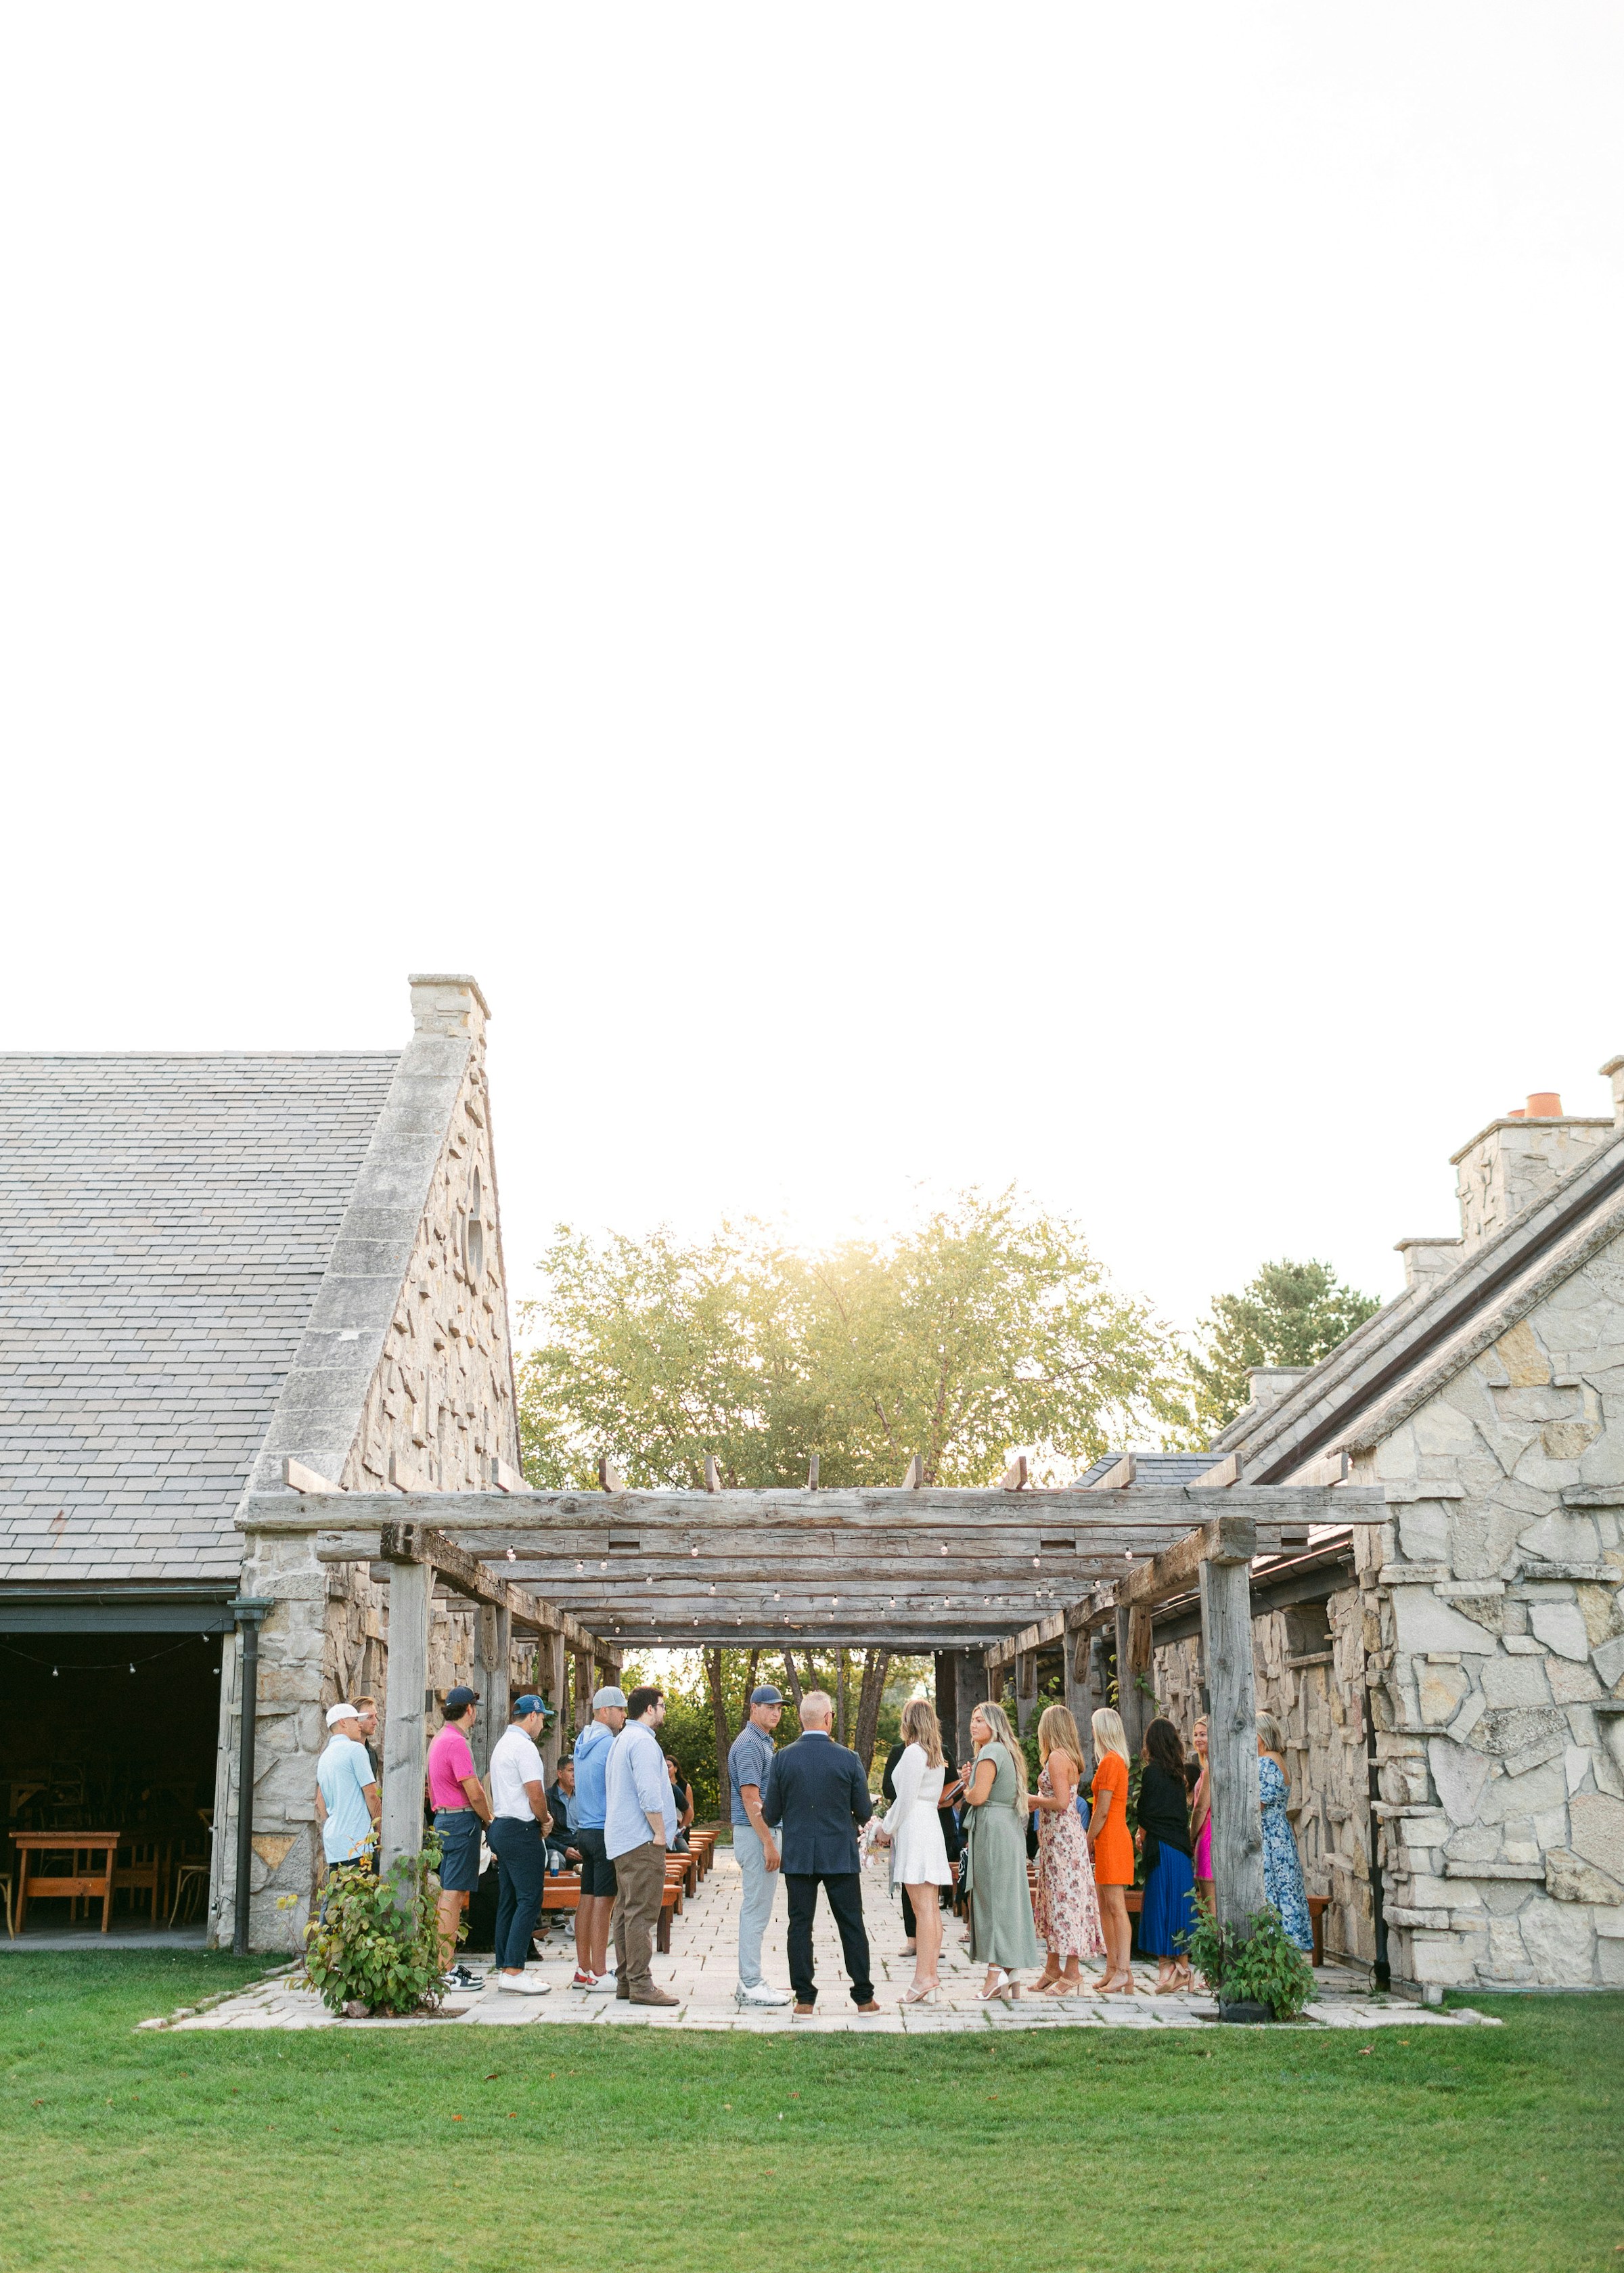 People at a wedding rehearsal | Source: Unsplash